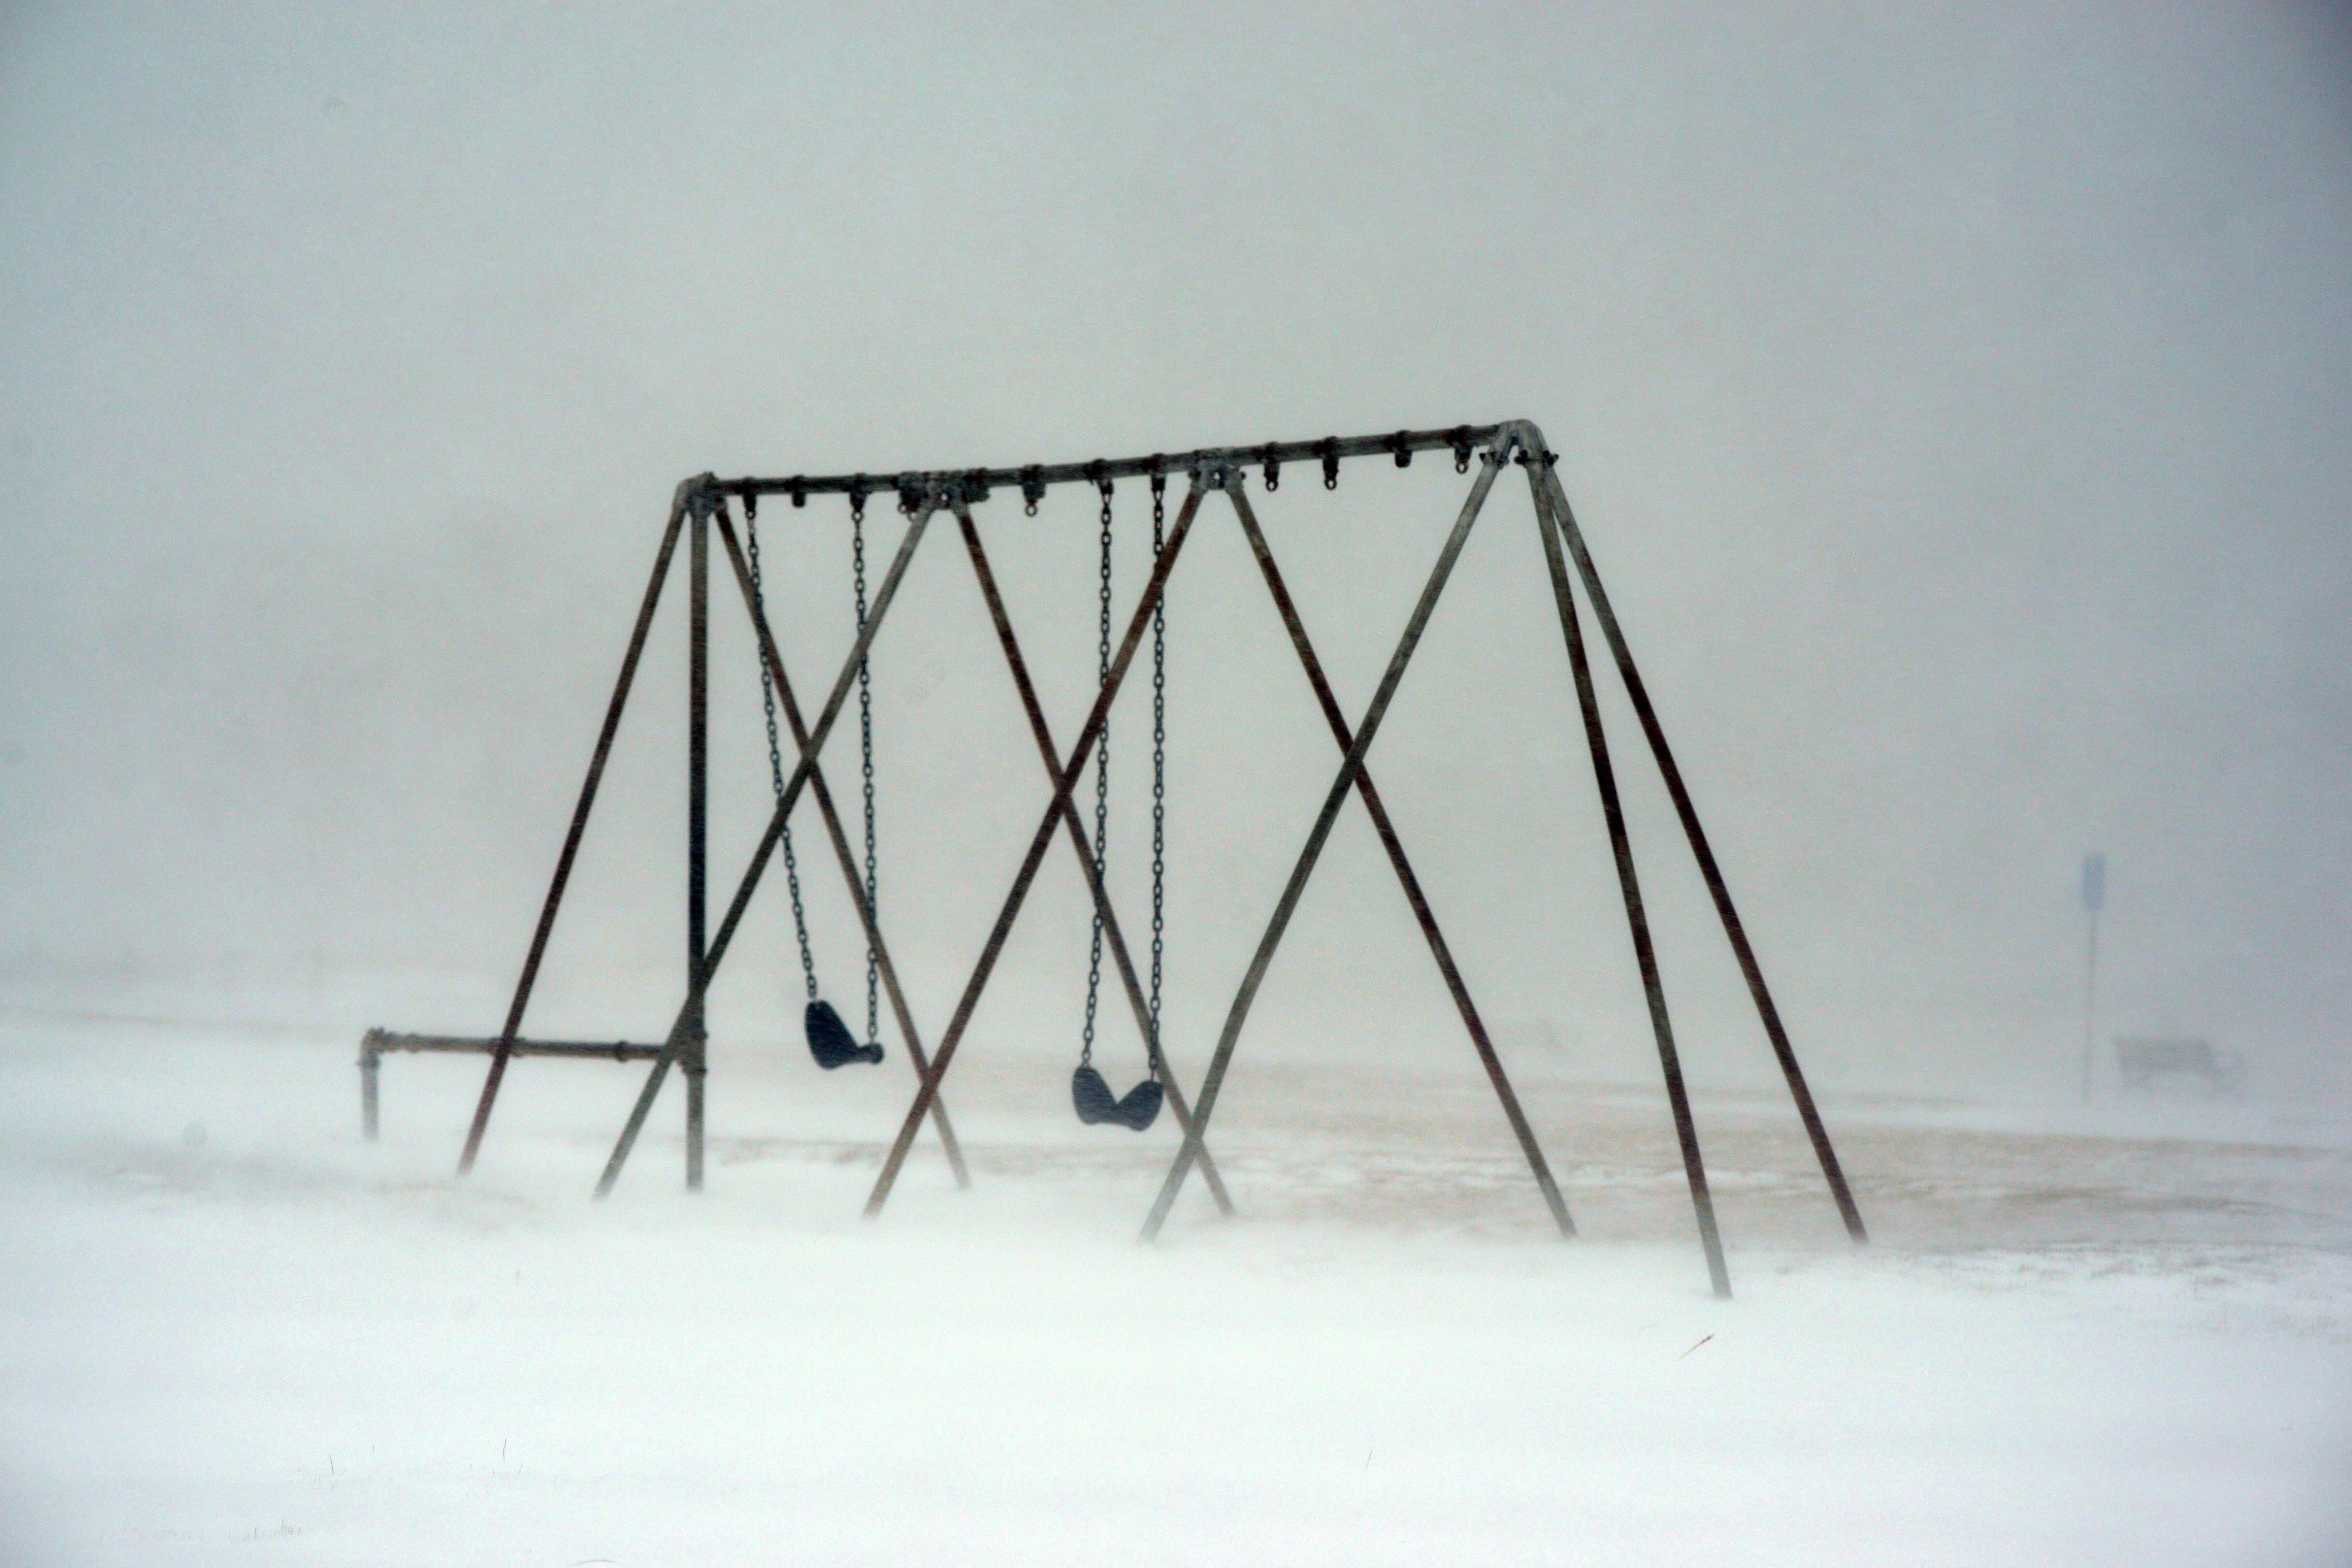 A swing set covered in snow.